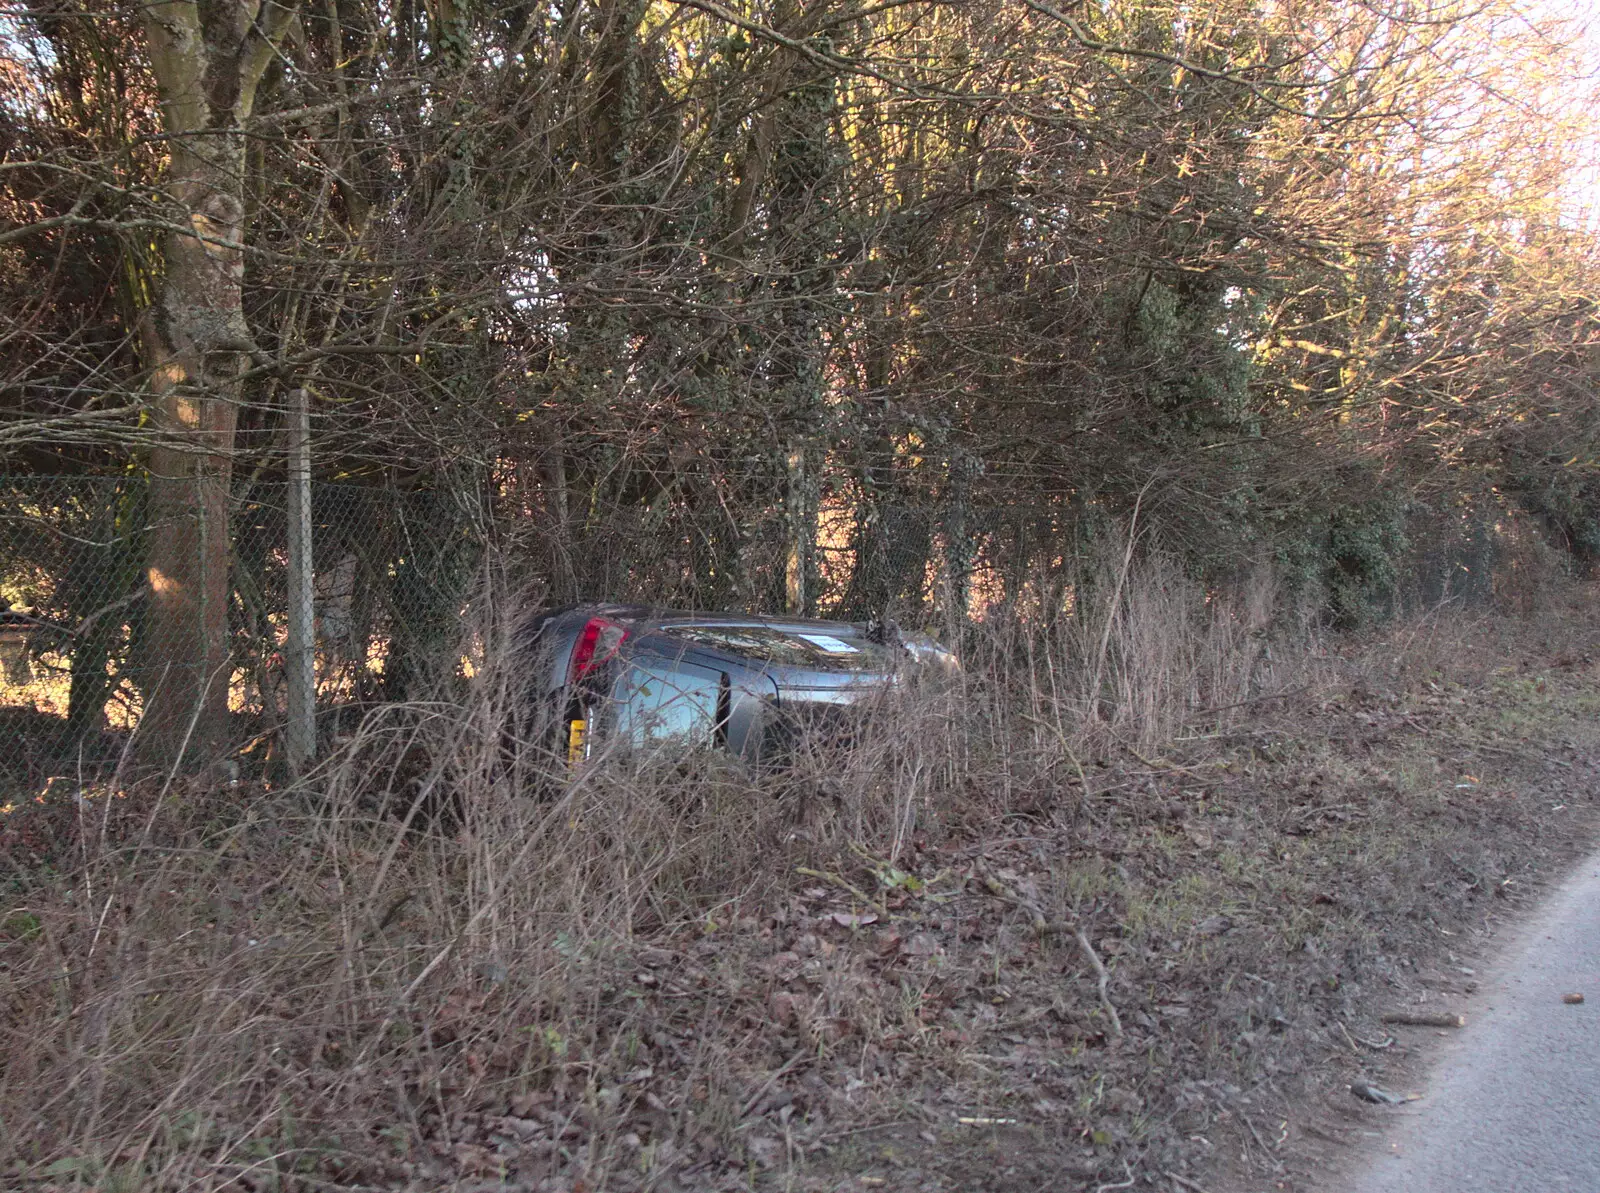 Some tool has tipped their car into a ditch, from A Walk Around Eye, and the Return of Red Tent, Suffolk and London - 25th February 2018